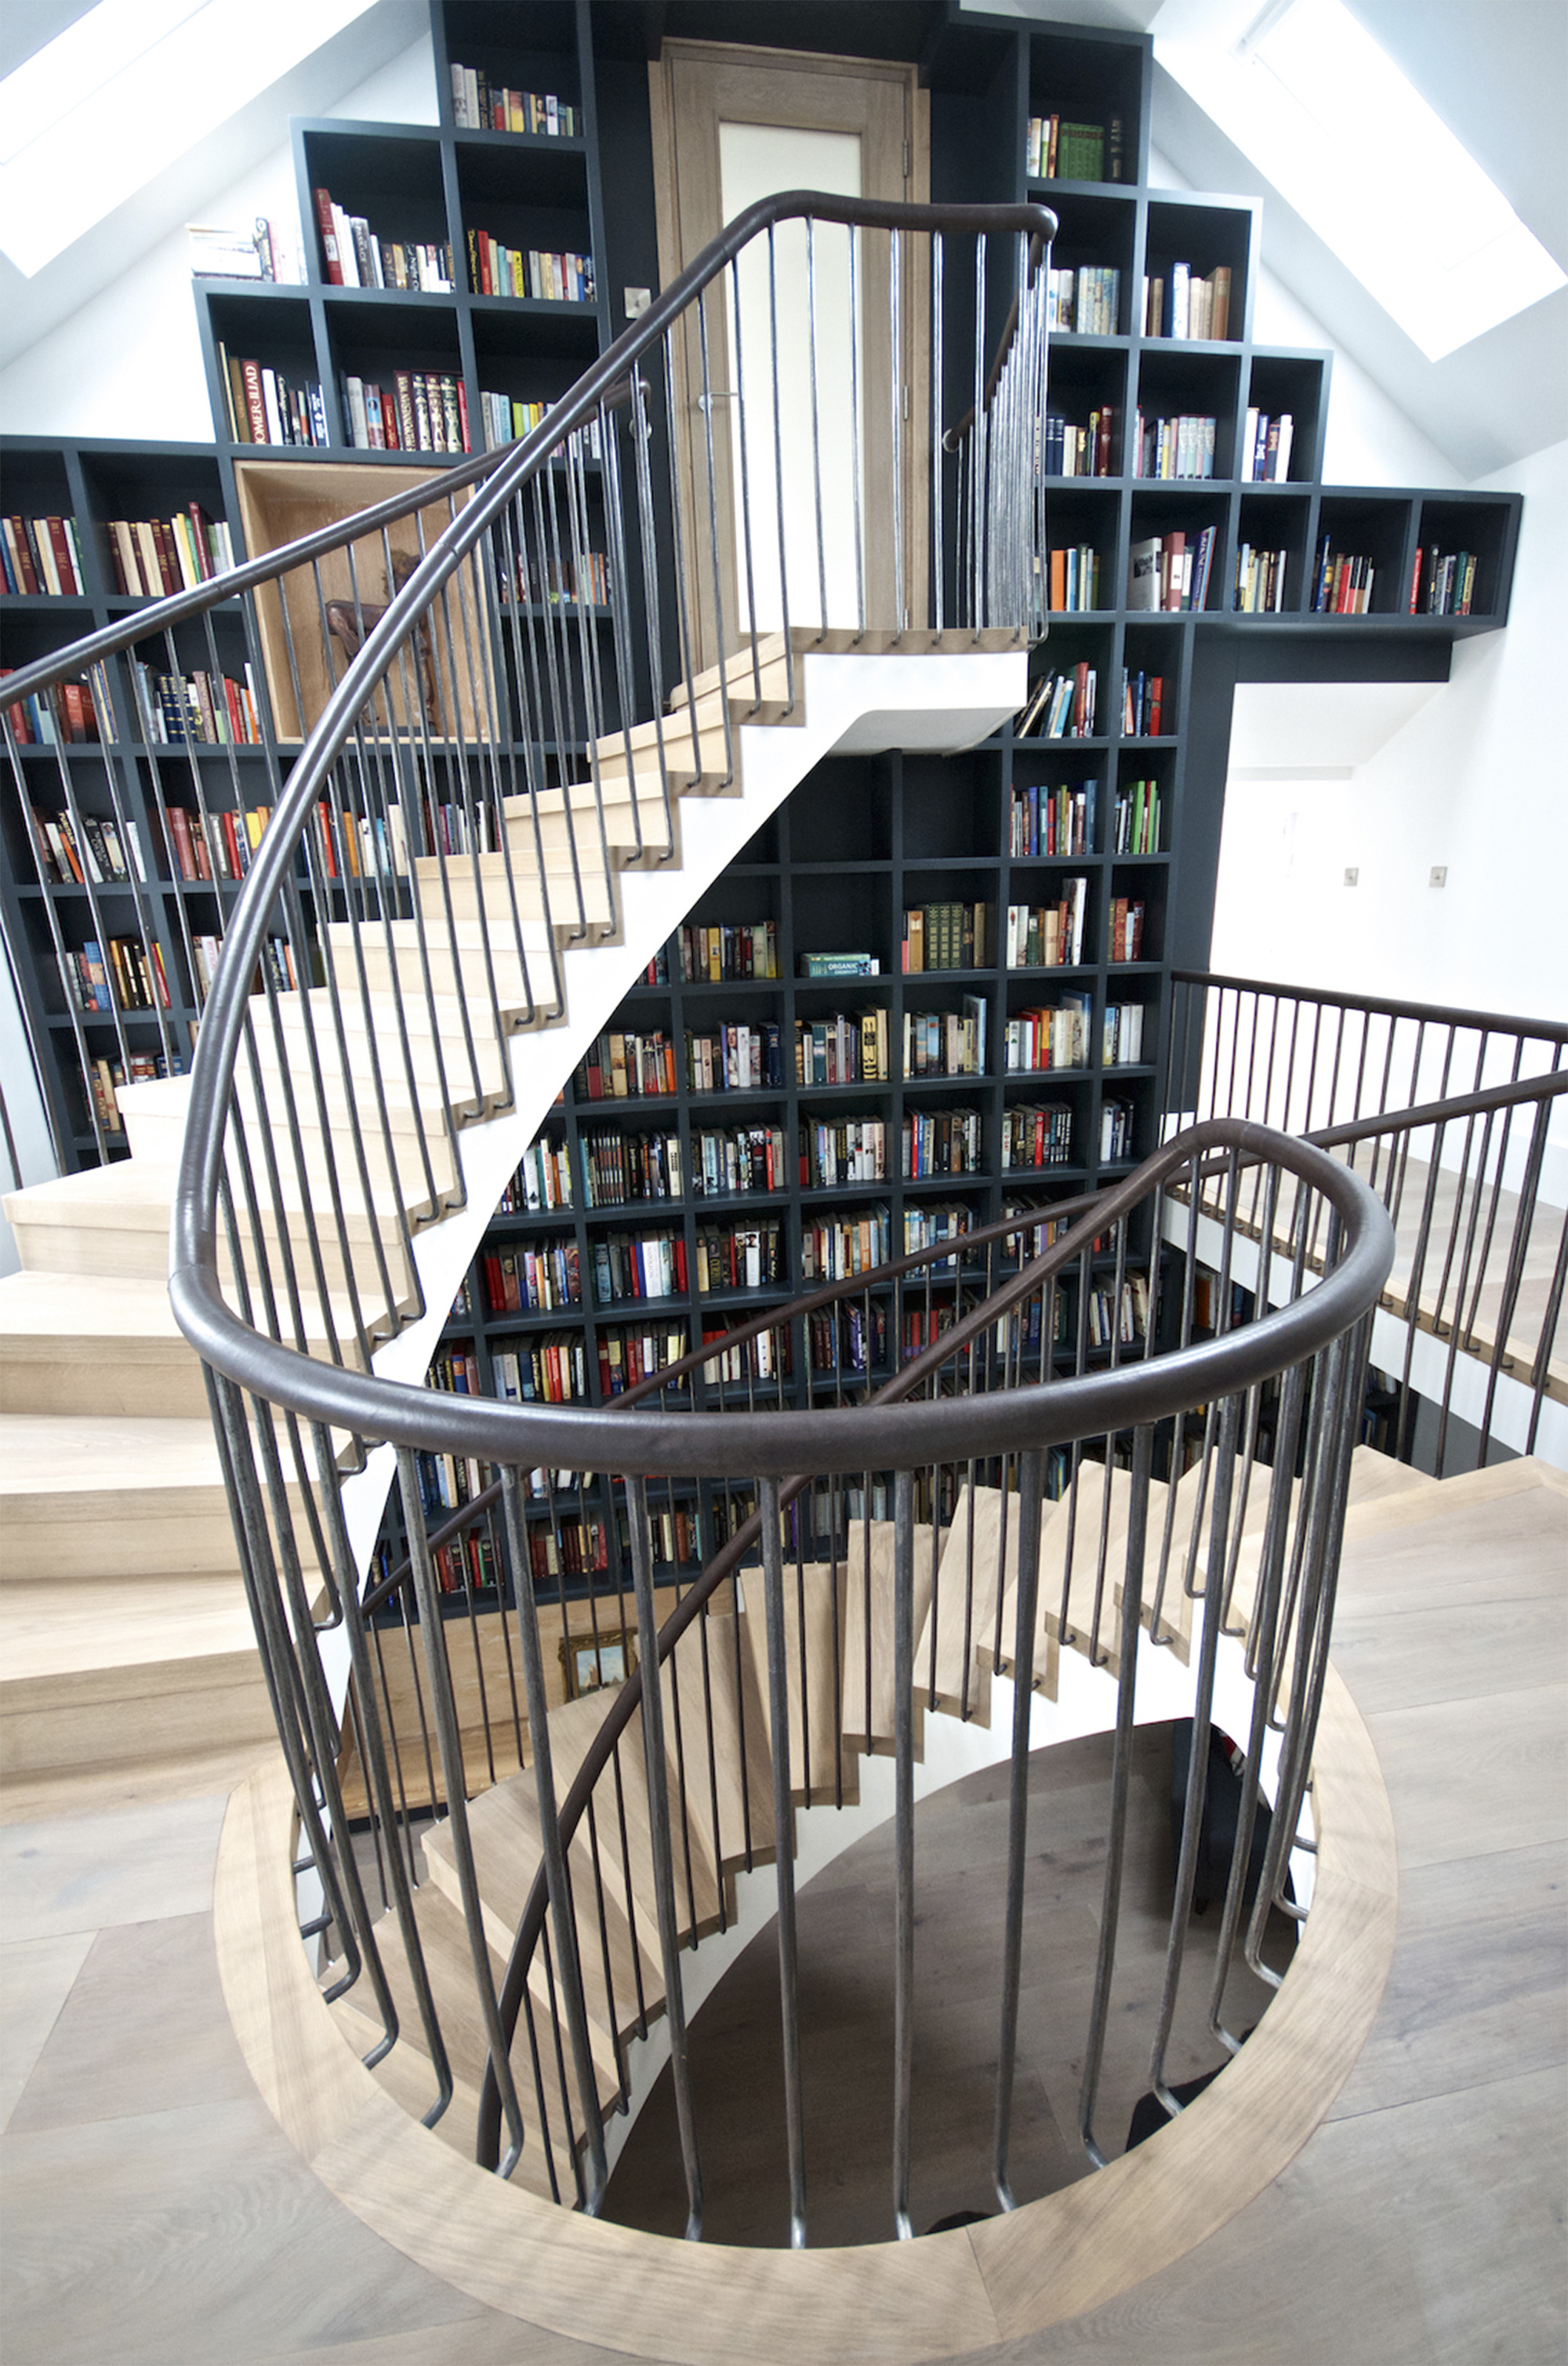 How to Choose a Spiral Staircase or Helical Design - Build It